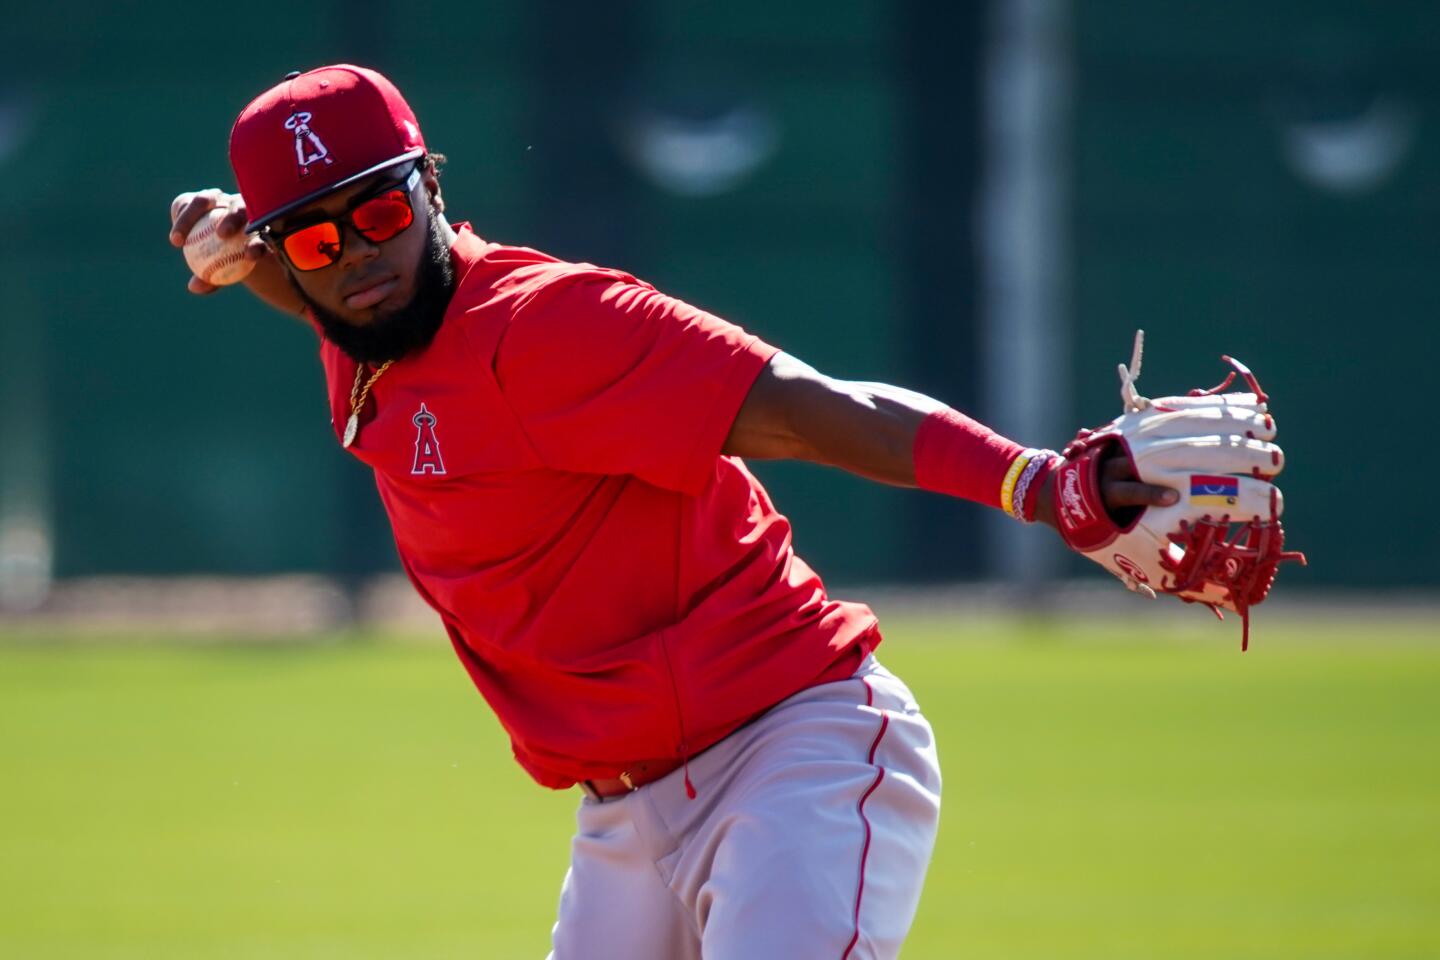 Angels infielder Luis Rengifo participates in a workout during spring training in Tempe.